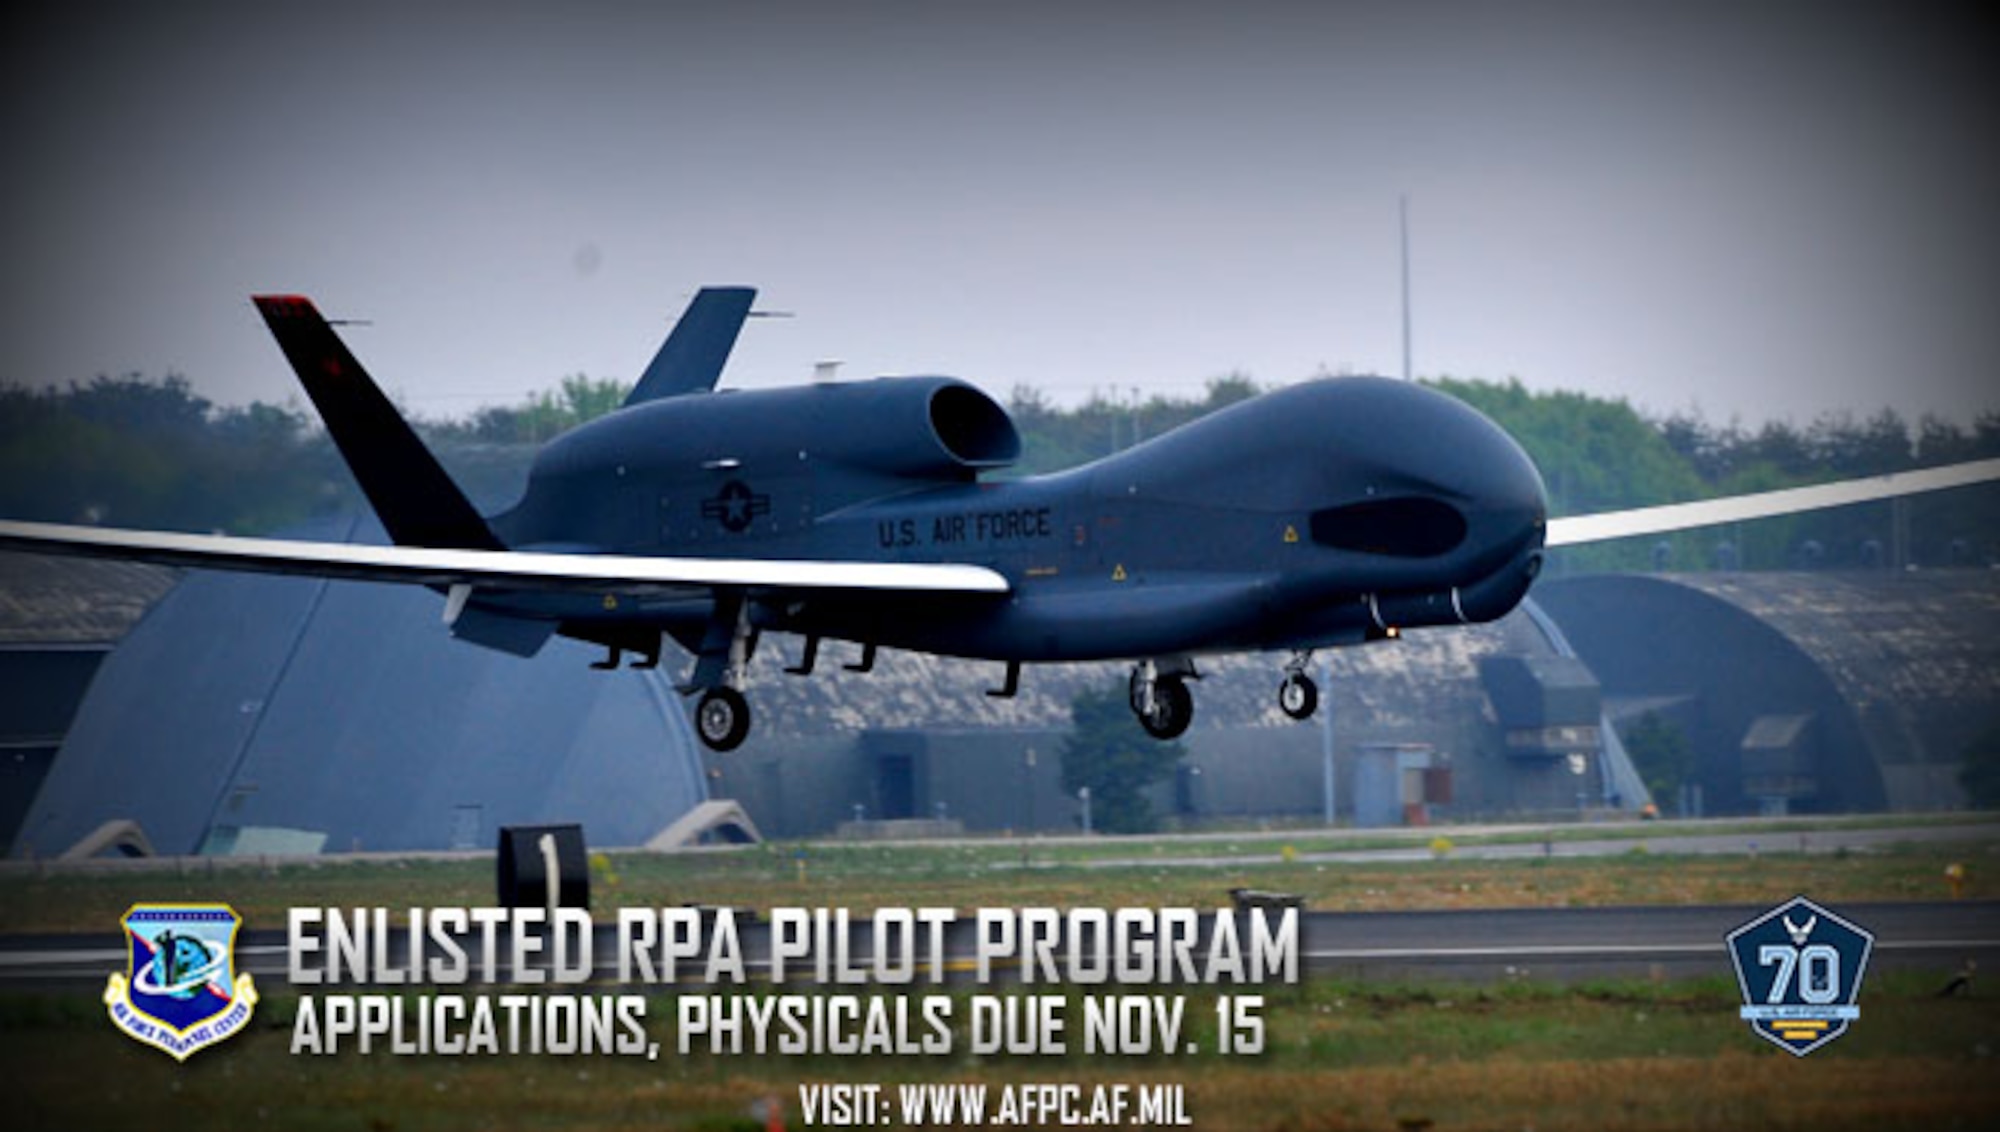 The application window is open for Airmen interested in becoming enlisted remotely piloted aircraft pilots as a part of the deliberate approach to enhance the Air Force’s Intelligence, Surveillance and Reconnaissance mission. (U.S. Air Force graphic by Kat Bailey)